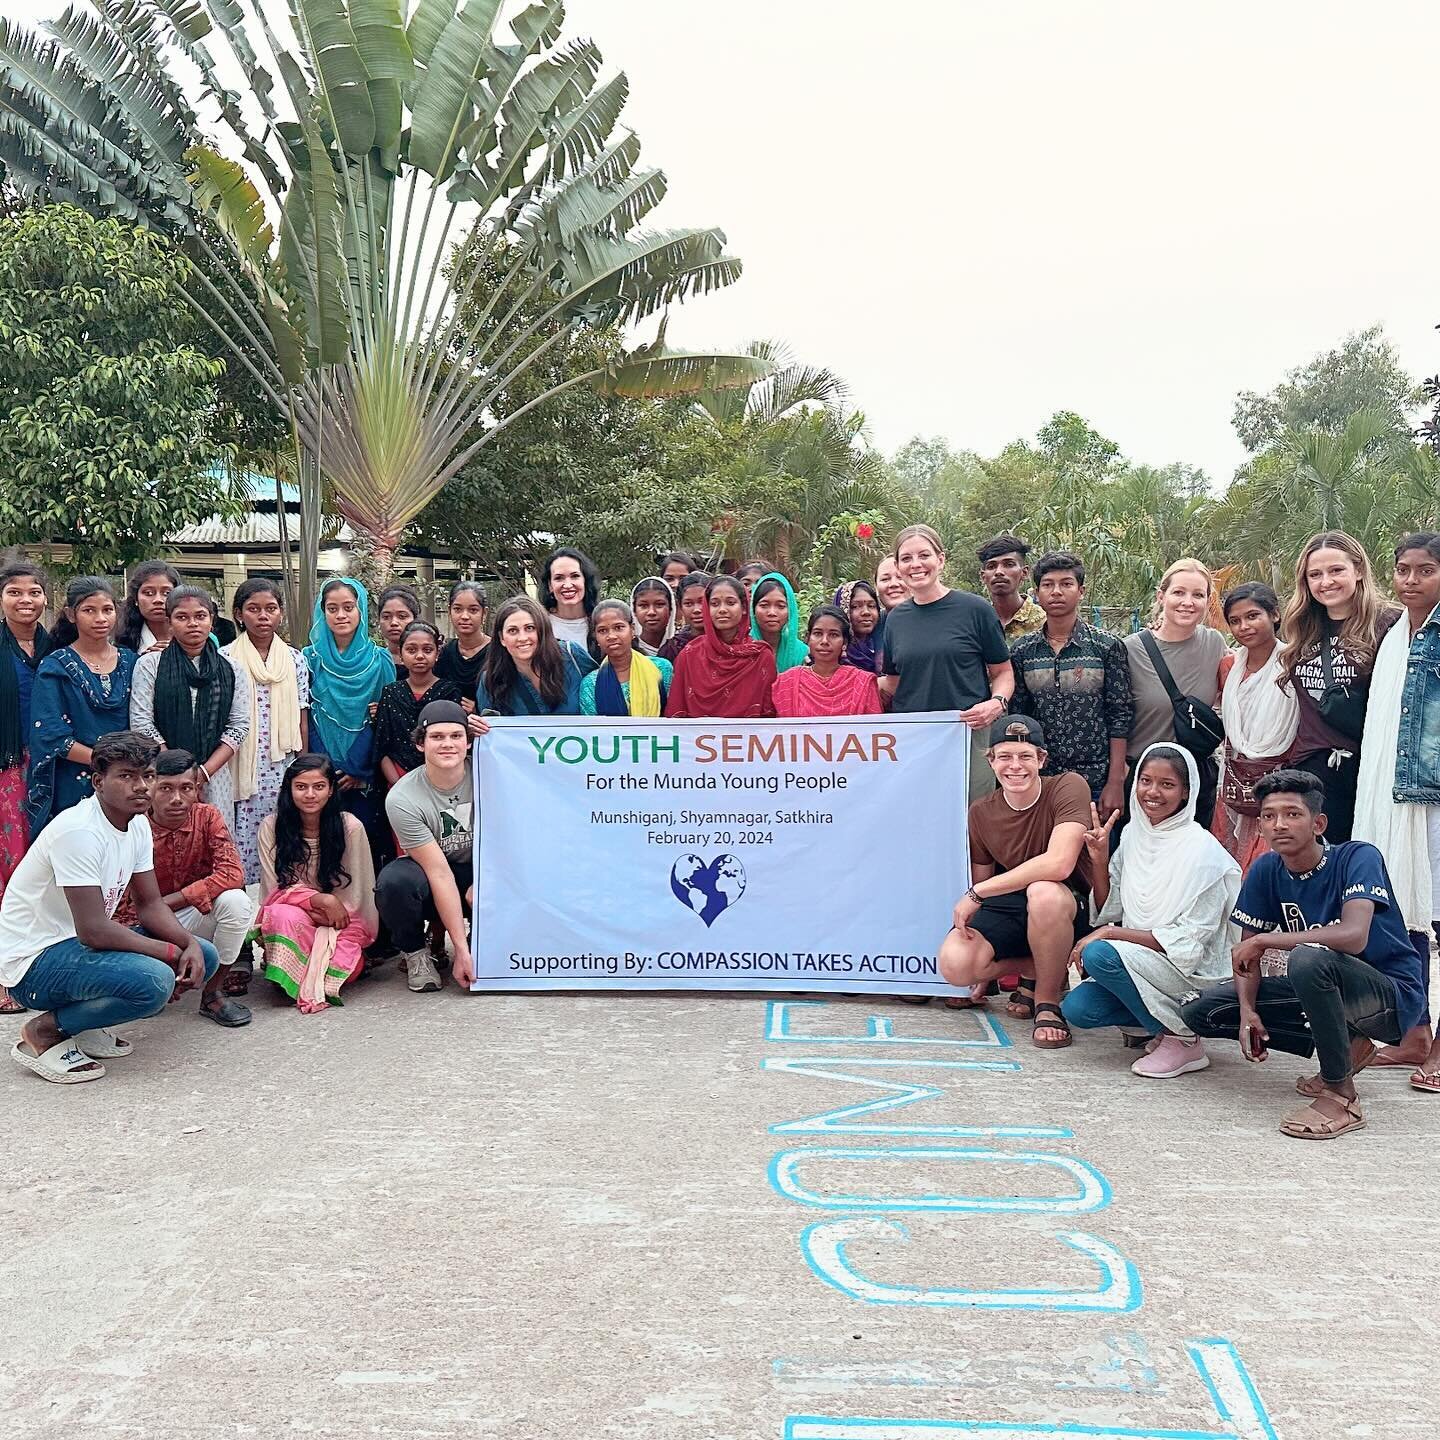 Youth Seminar at Munda Villages. After 48 hours of flying and eight hours of driving, we were so excited to get to spend the afternoon with Munda teens from all over the mangroves. Celebrations, art, goal setting, a STEM science lesson, and (of cours